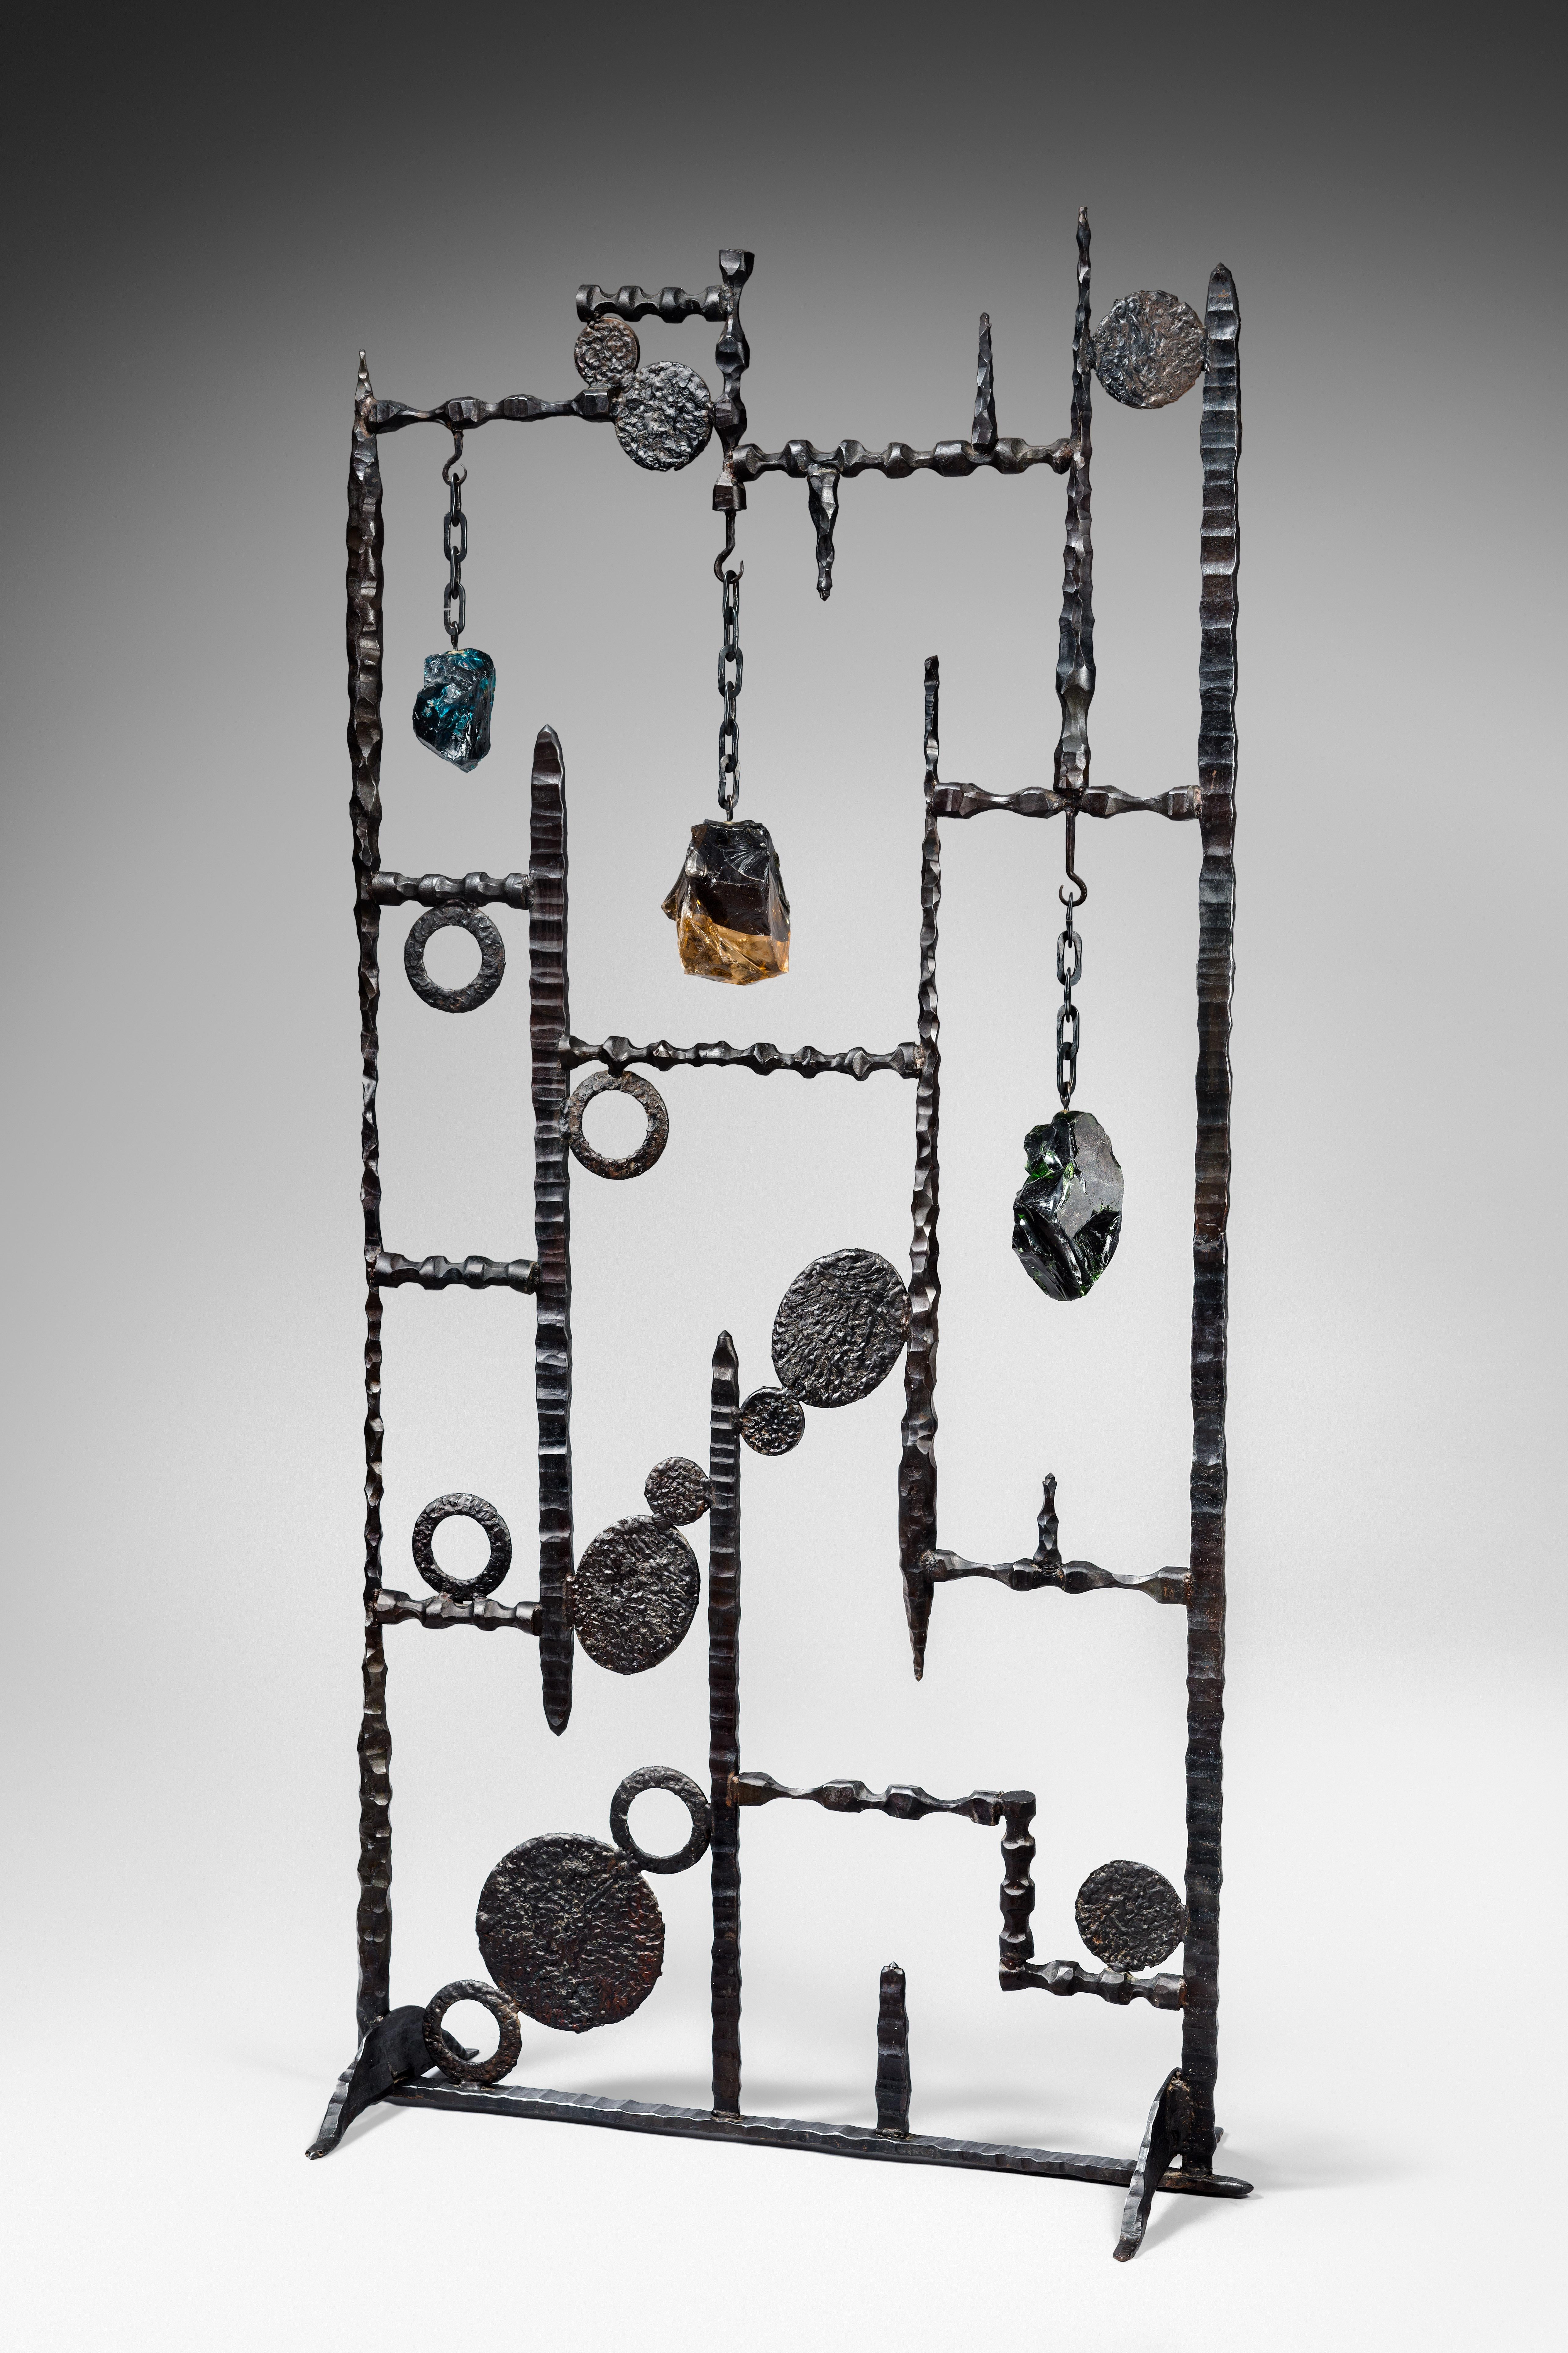 Portal/gate, one of a kind, glass and wrought iron, circa 1960
Measures: 200 cm height, 100 cm width.